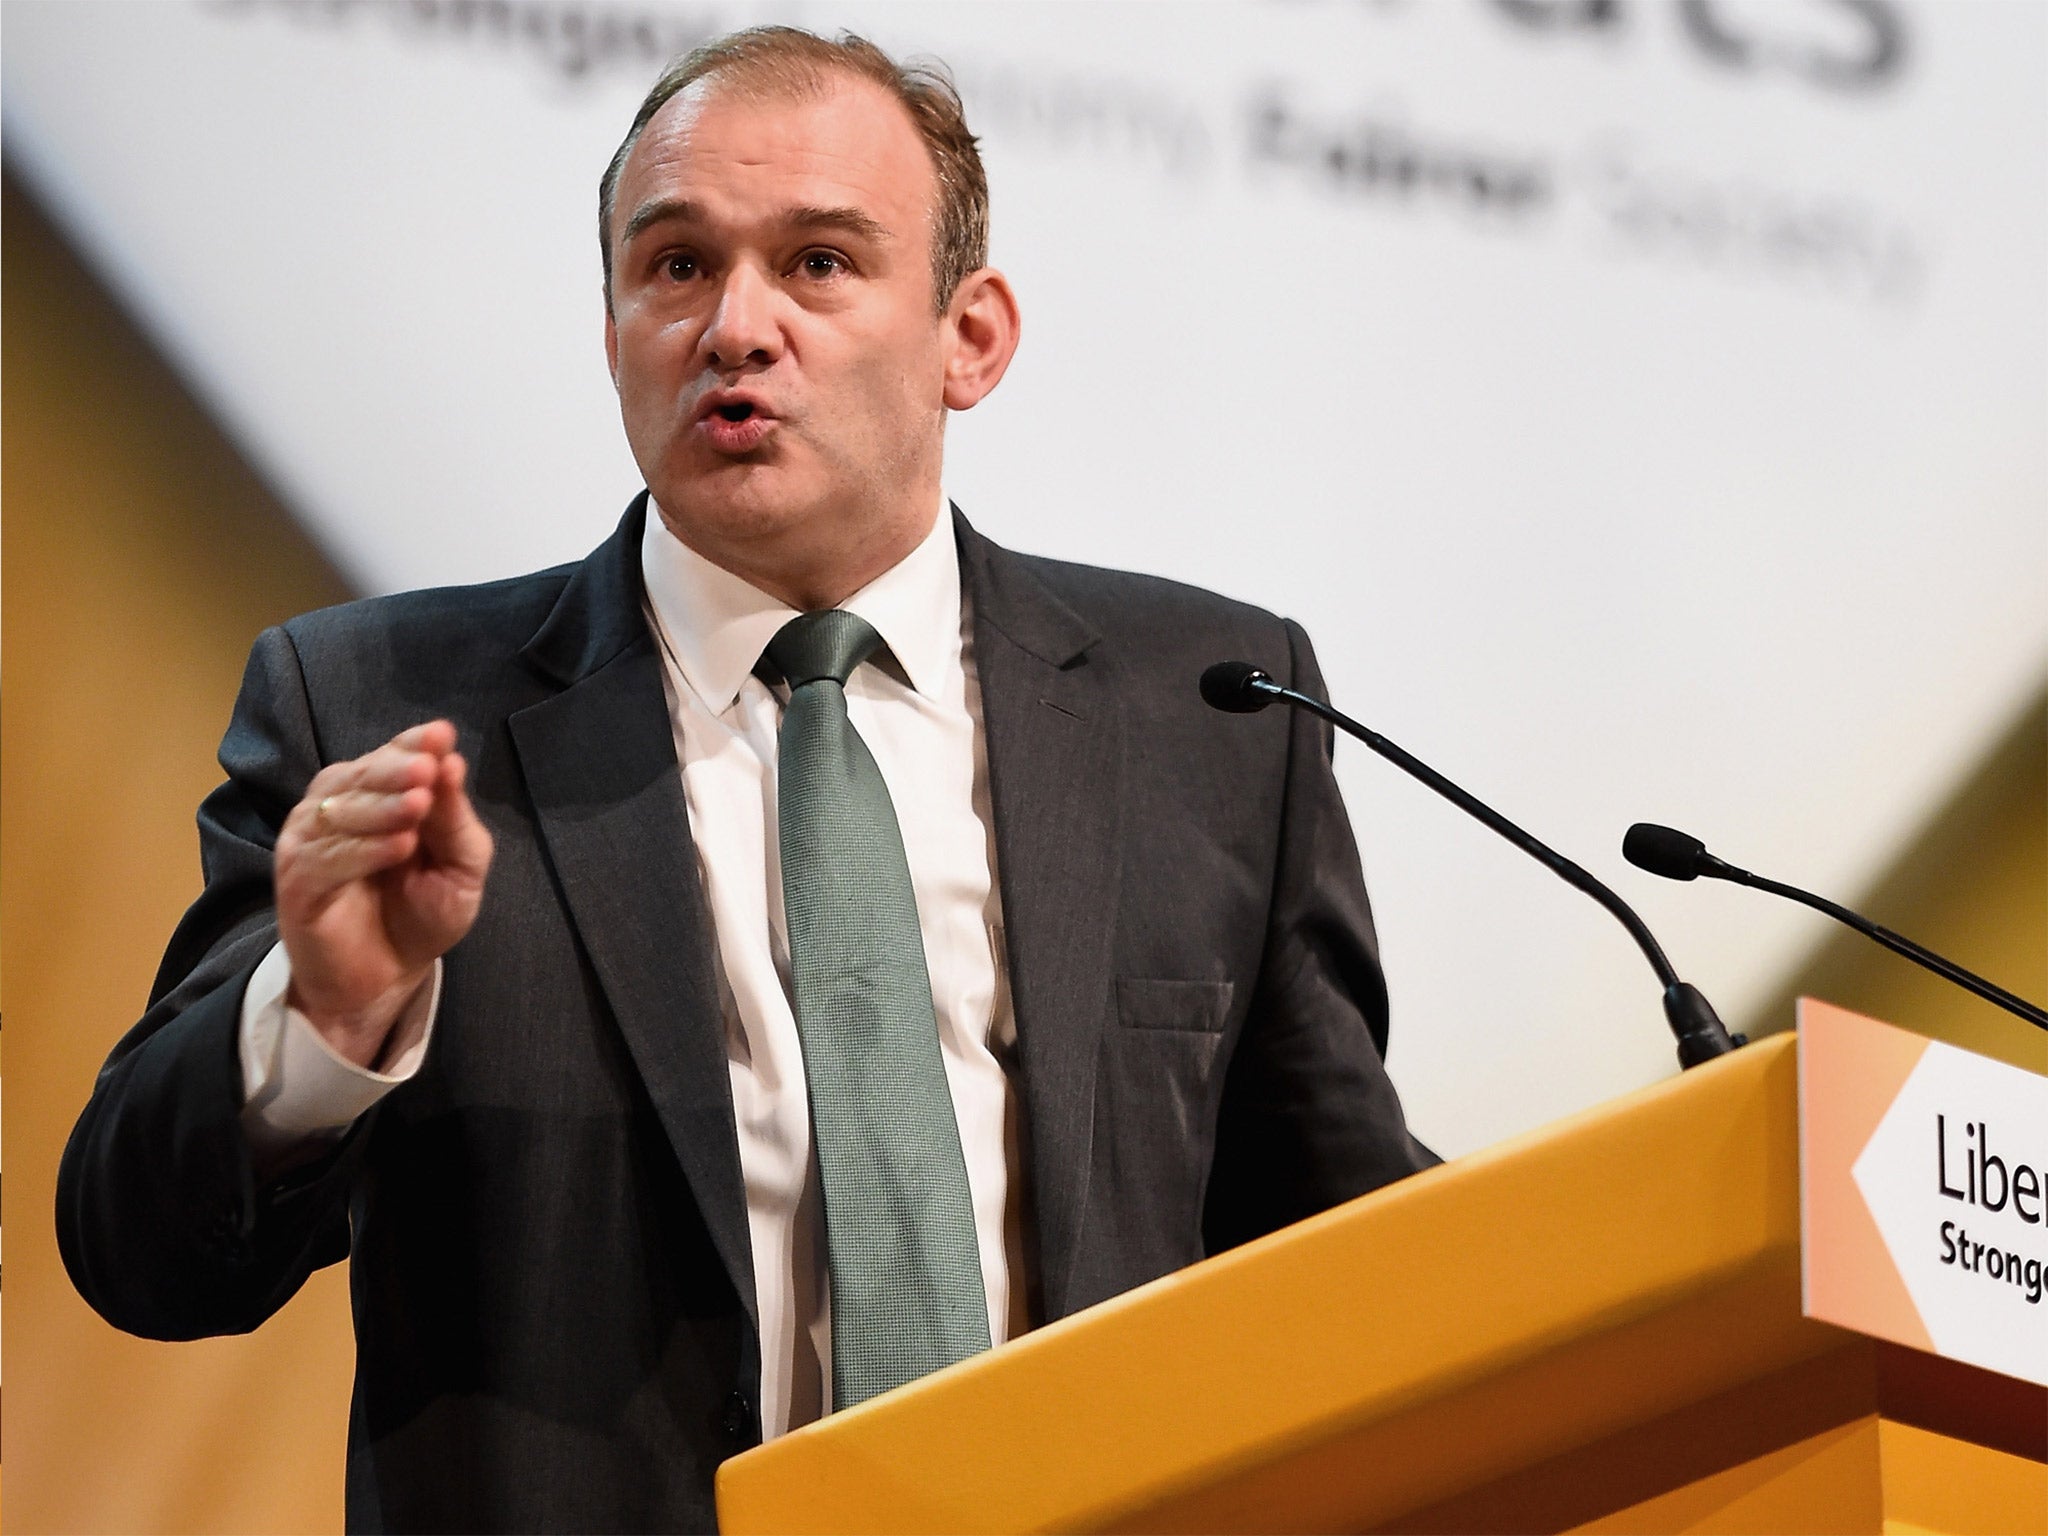 Energy Secretary Ed Davey, who happily used the word Christmas throughout his annual email to staff